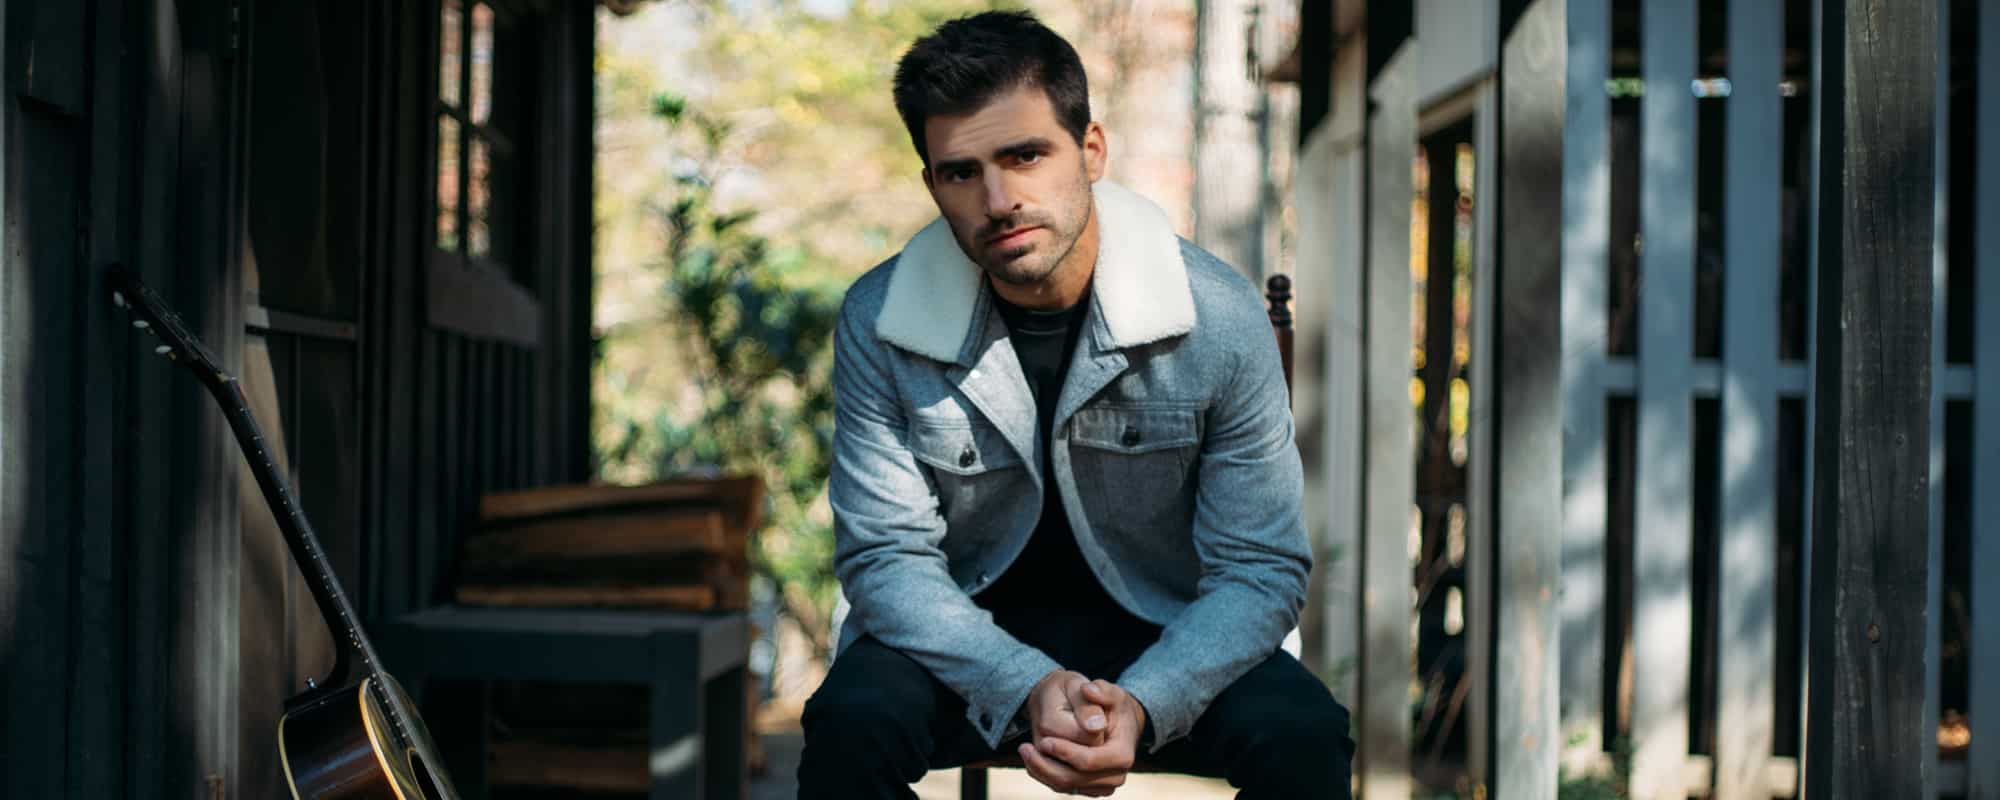 Mitch Rossell Looks Back on Tumultuous Times in New Single “2020”